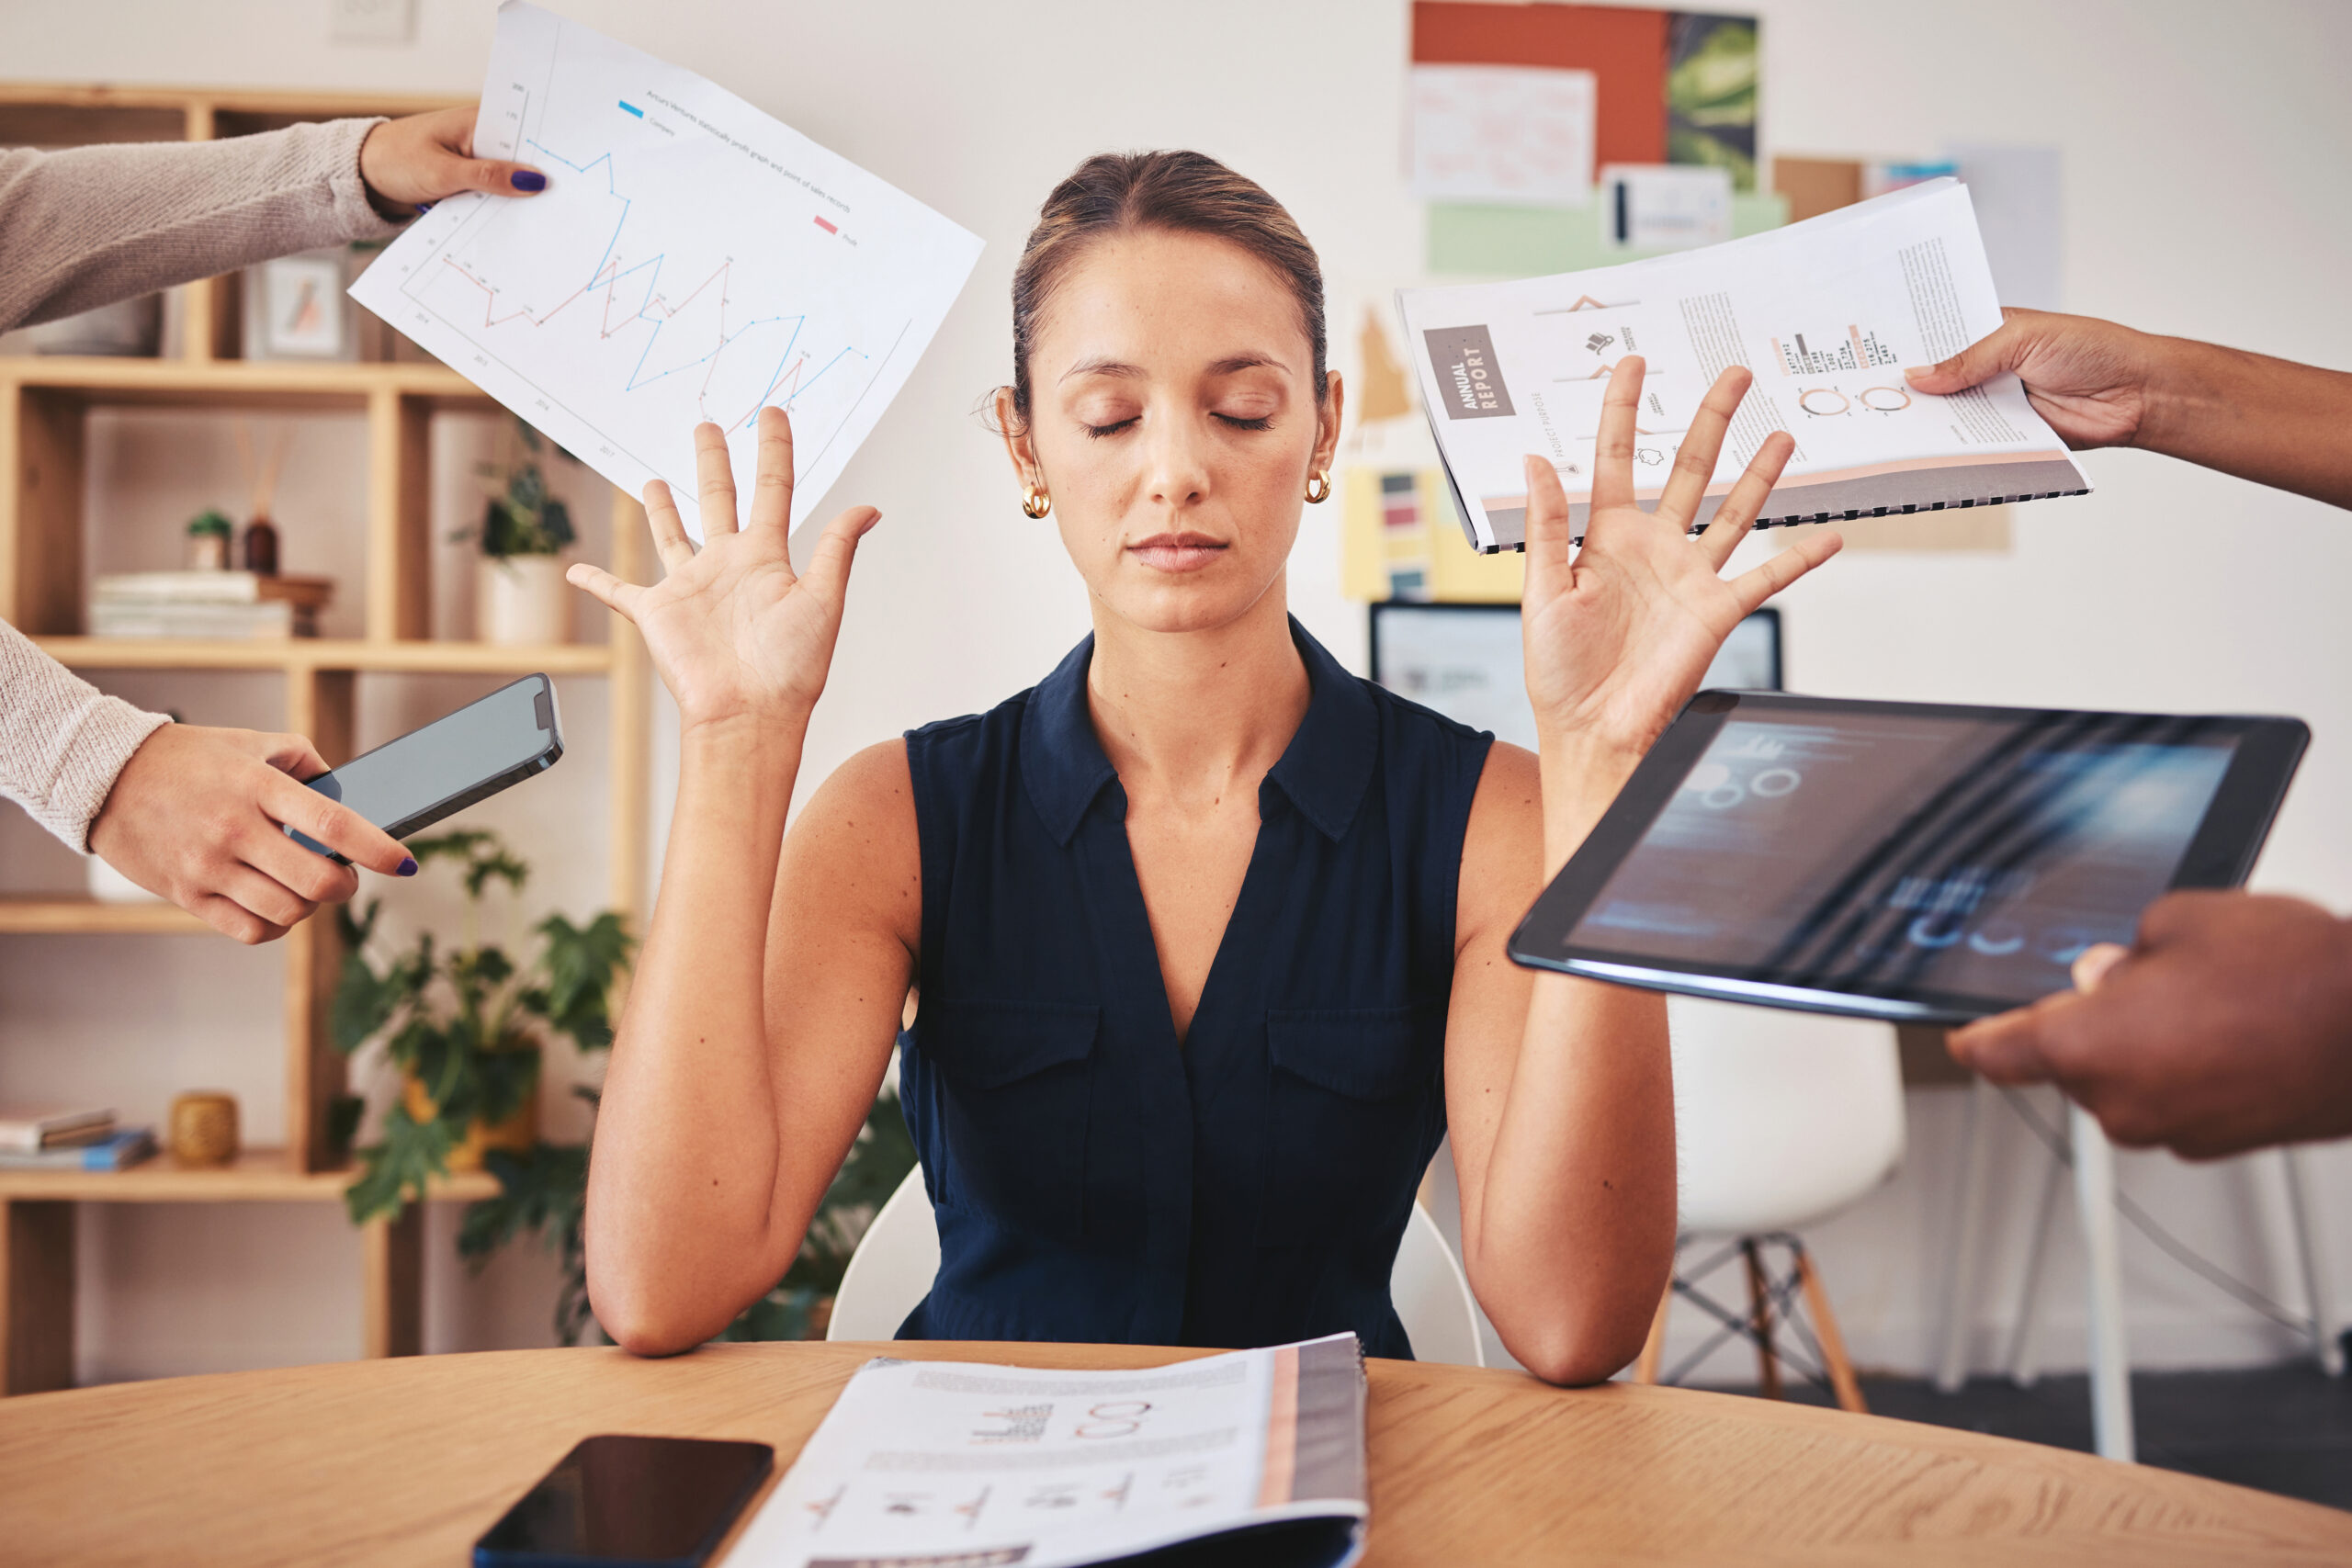 Photo of a white woman with her eyes closed and her hands up in a "stop it" gesture, as several hands come in from outside the frame holding spreadsheets, a tablet and a phone.